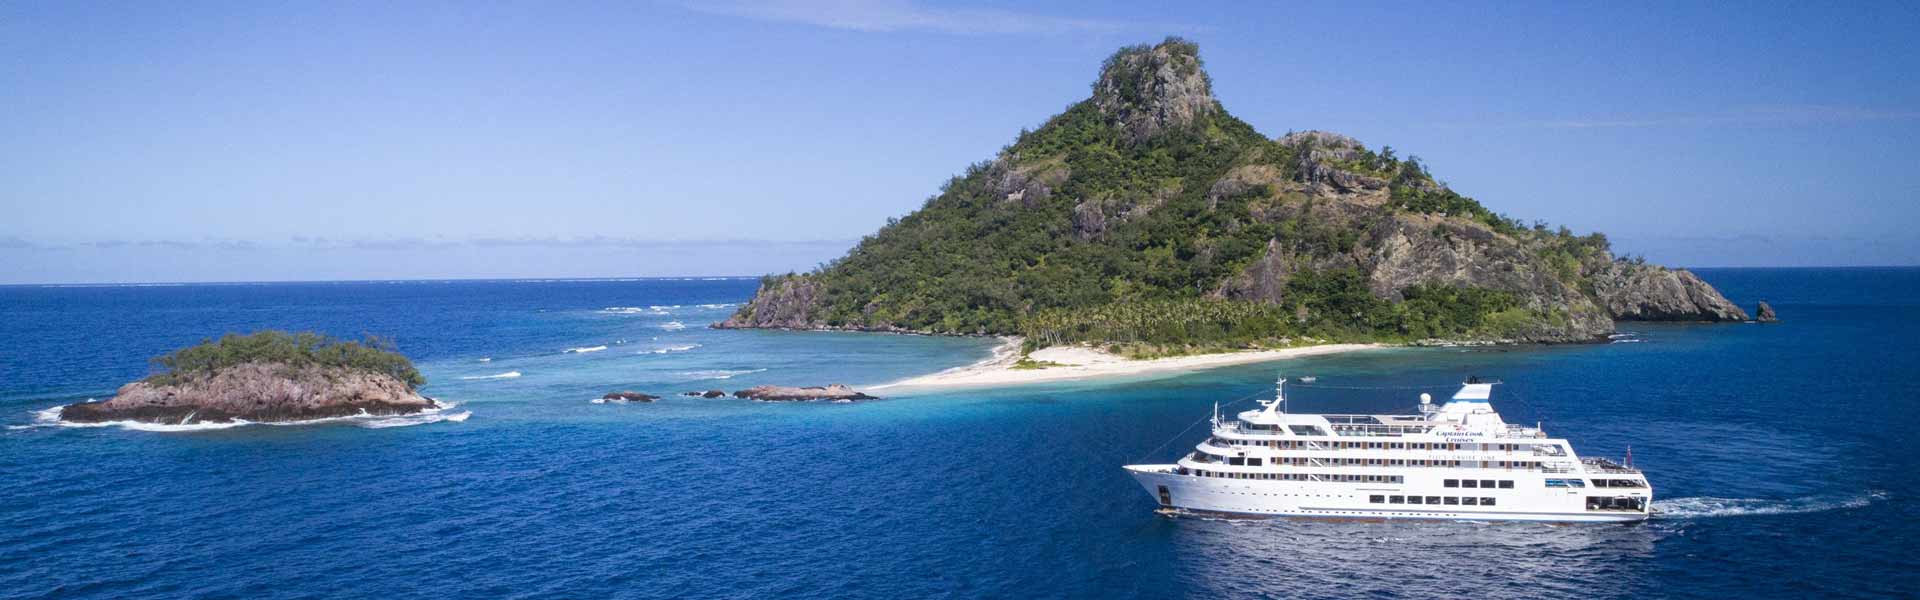 Cruise Package for Two (7 Nights in Mamanuca & Yasawa Islands) with Flights, Transfers and More!